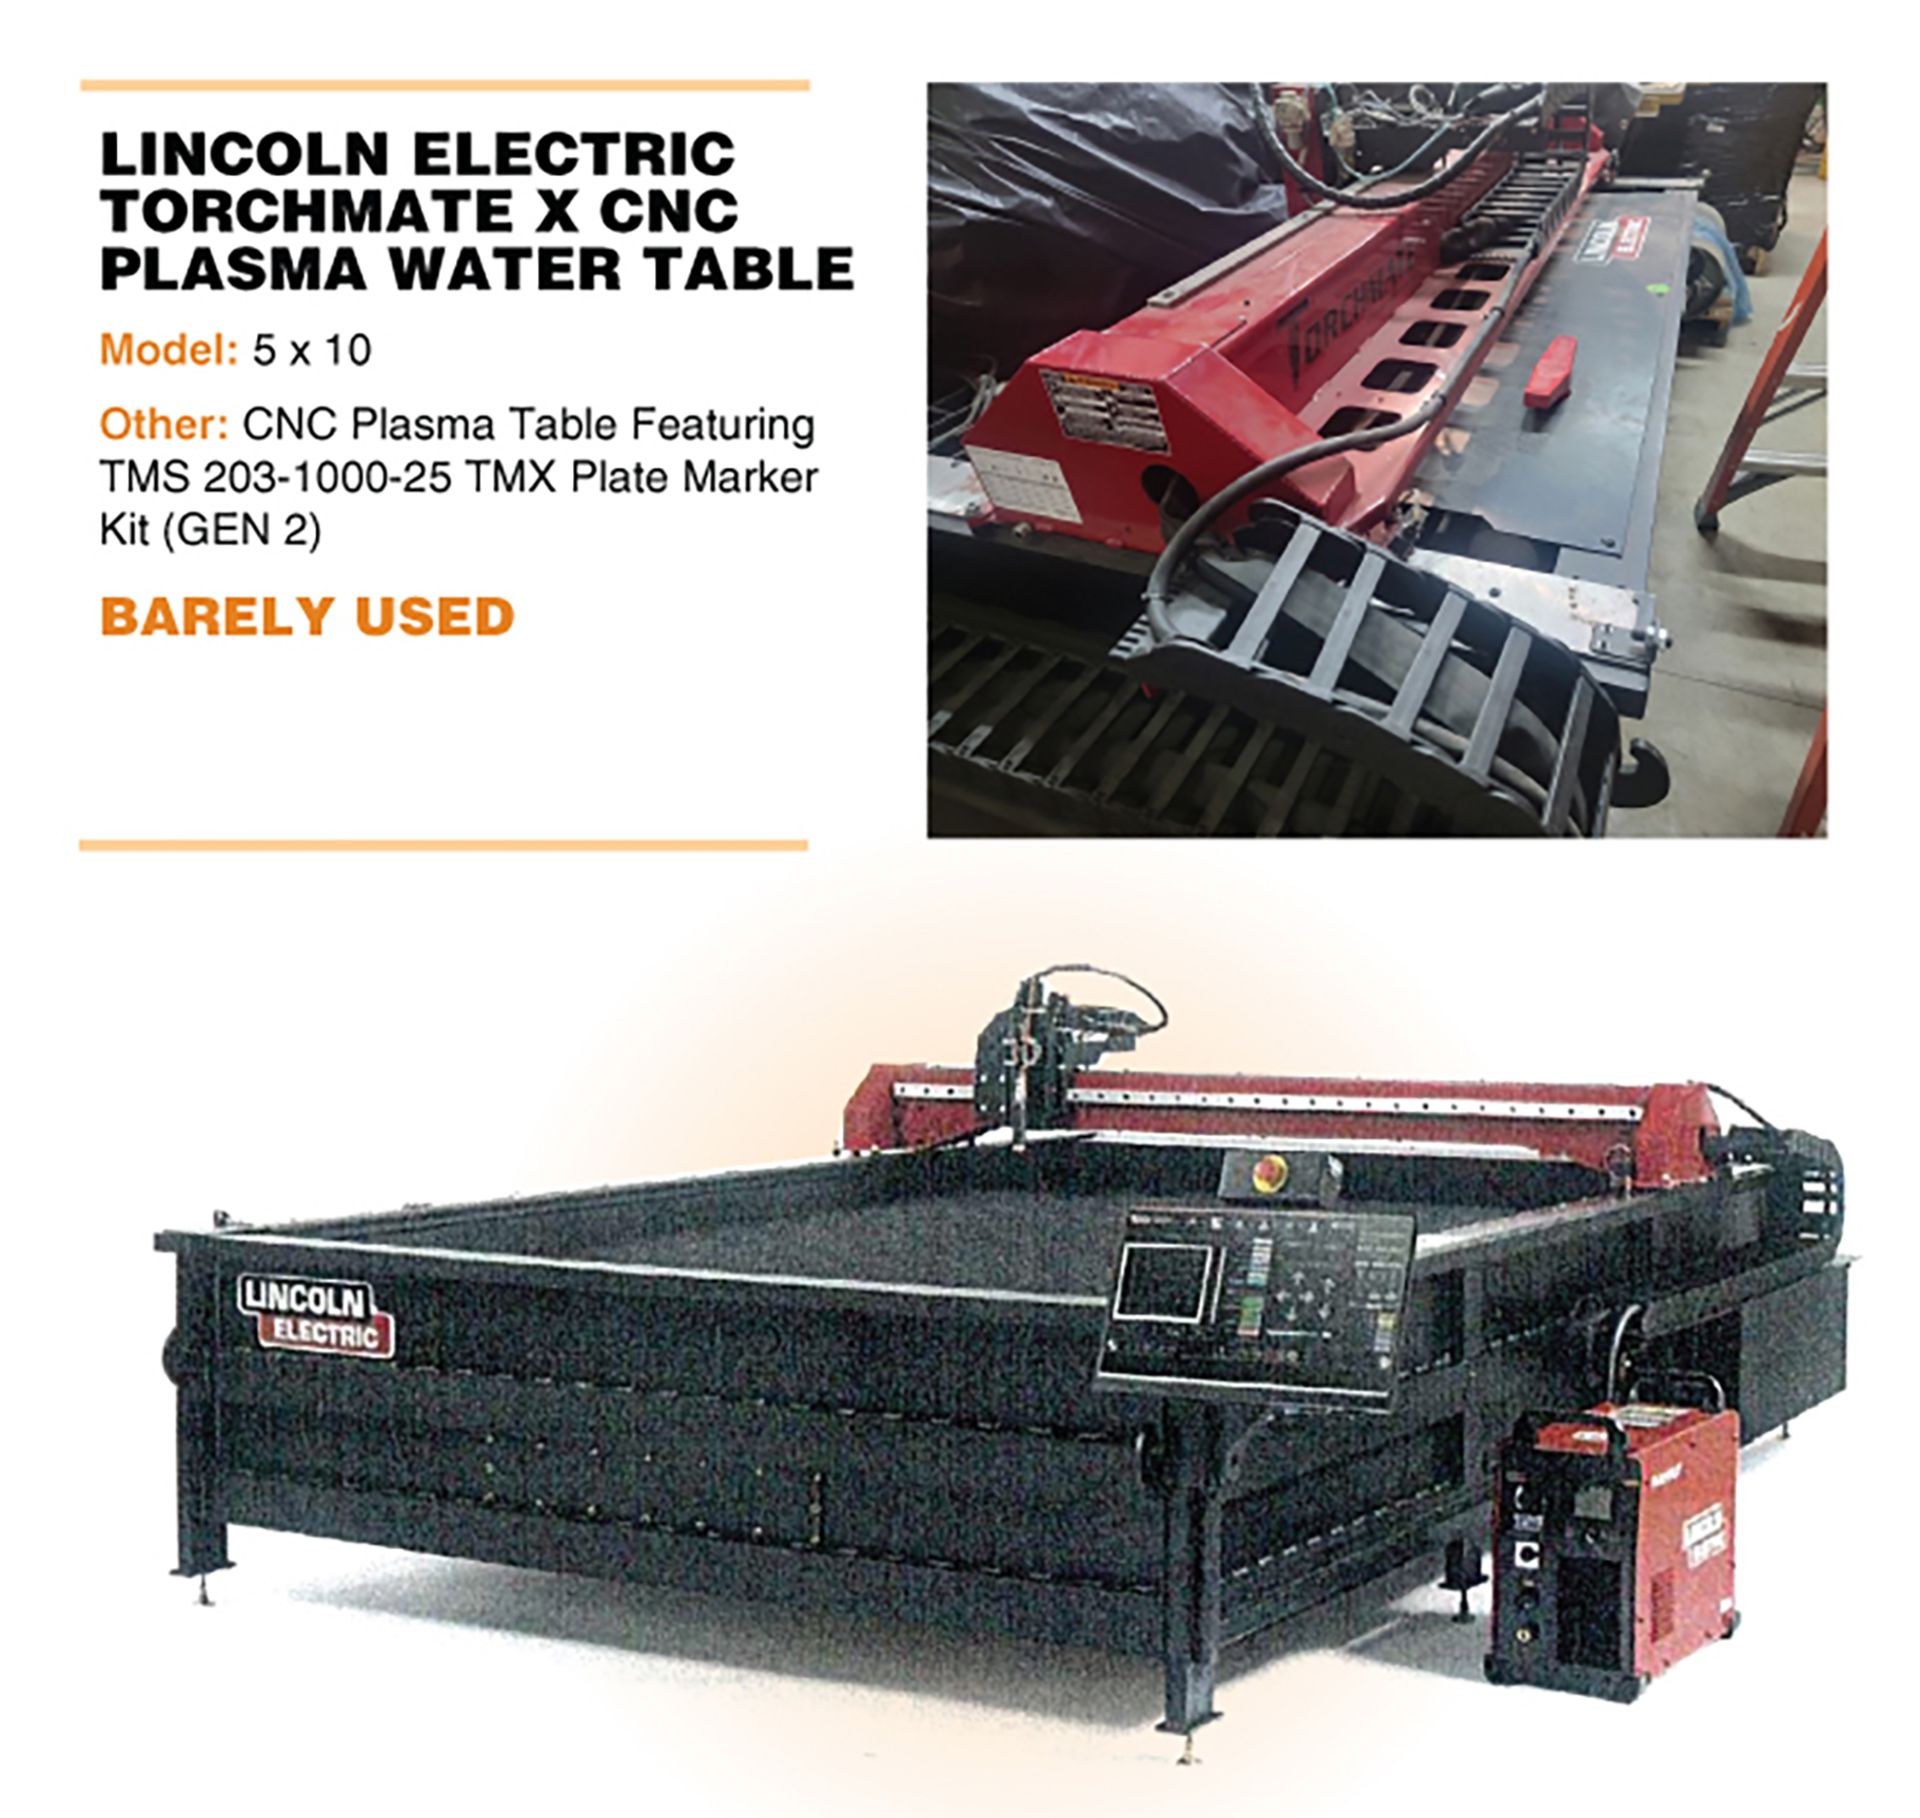 2020 Lincoln Electric Torchmate X CNC Plasma Water Table